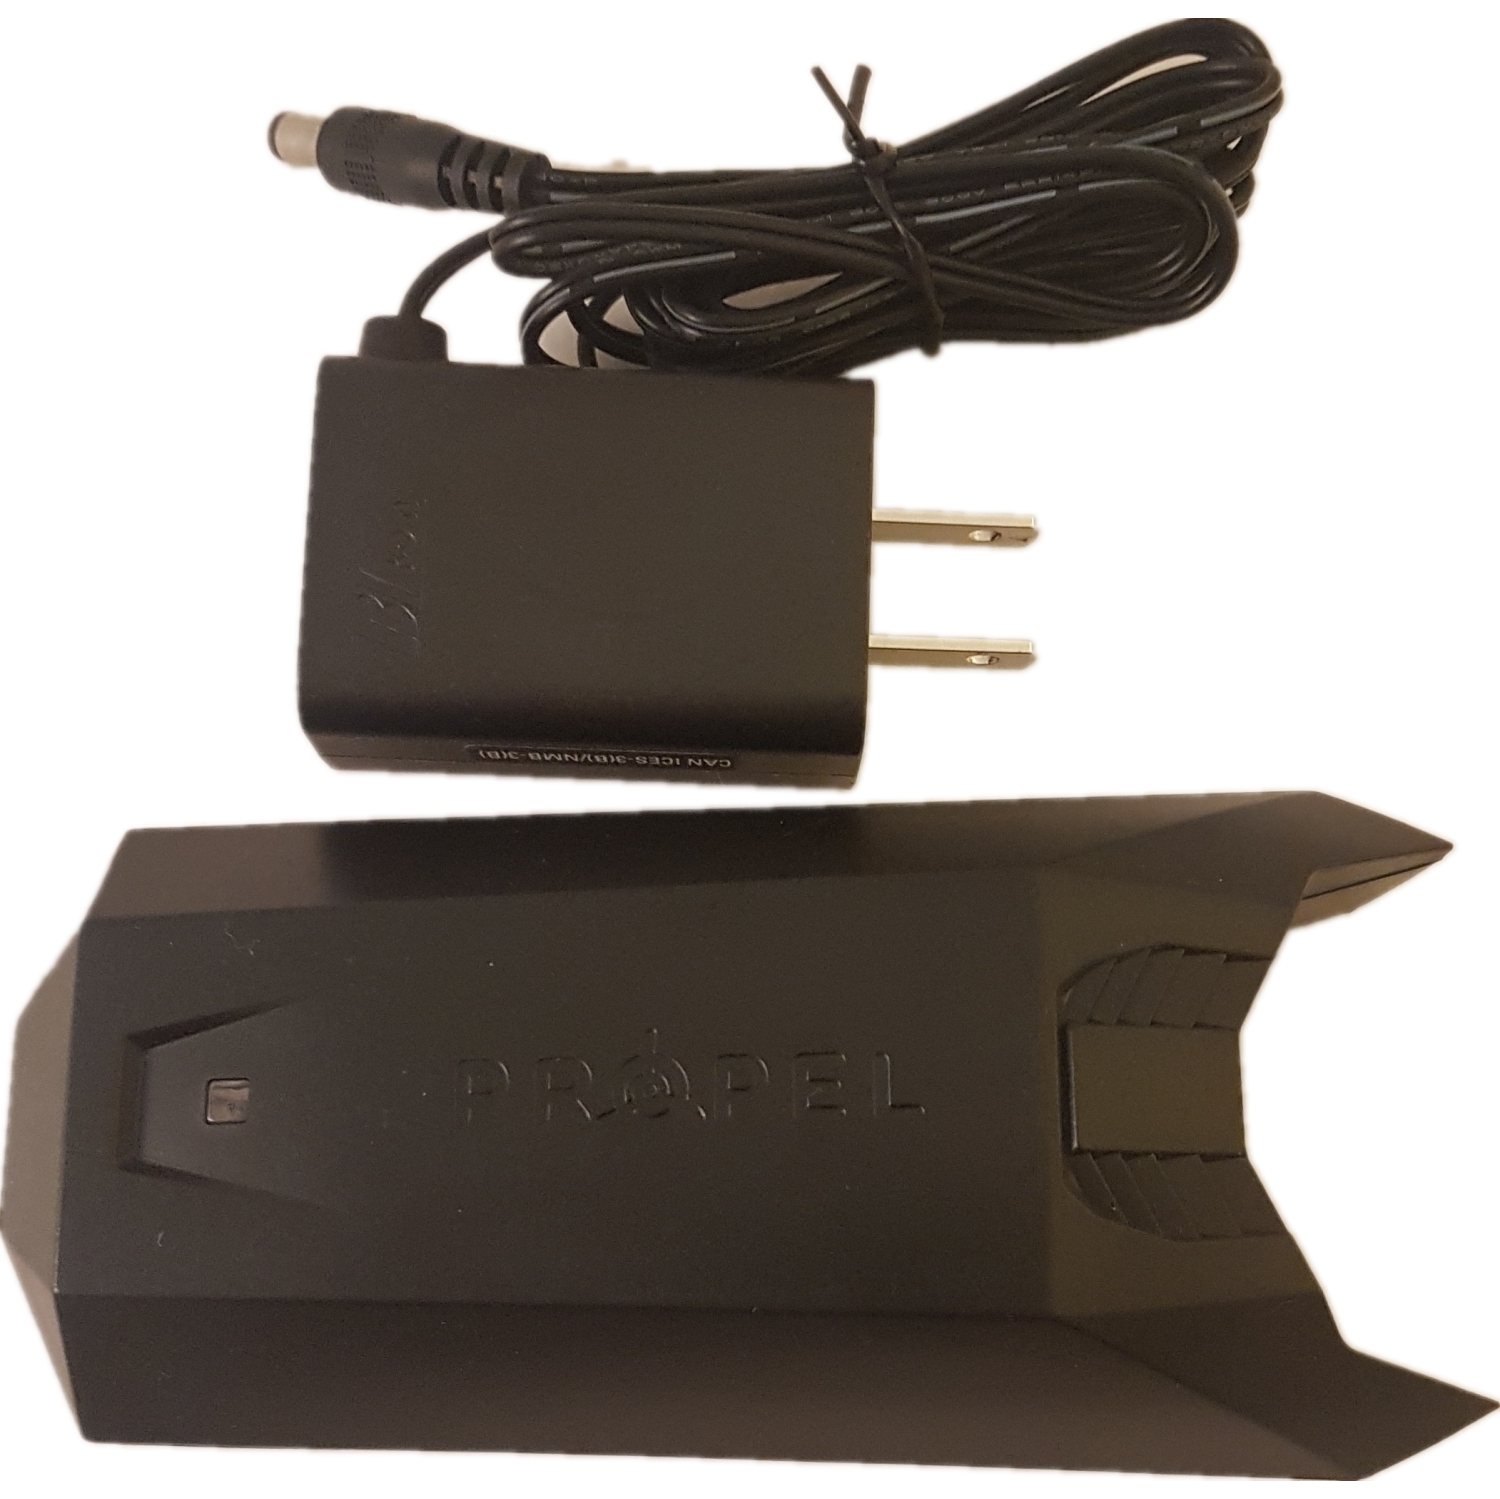 Propel X5 + WiFi RC Drone Battery Charger Box Dock Power Supply OEM PL-1650T 10V- Refurbished